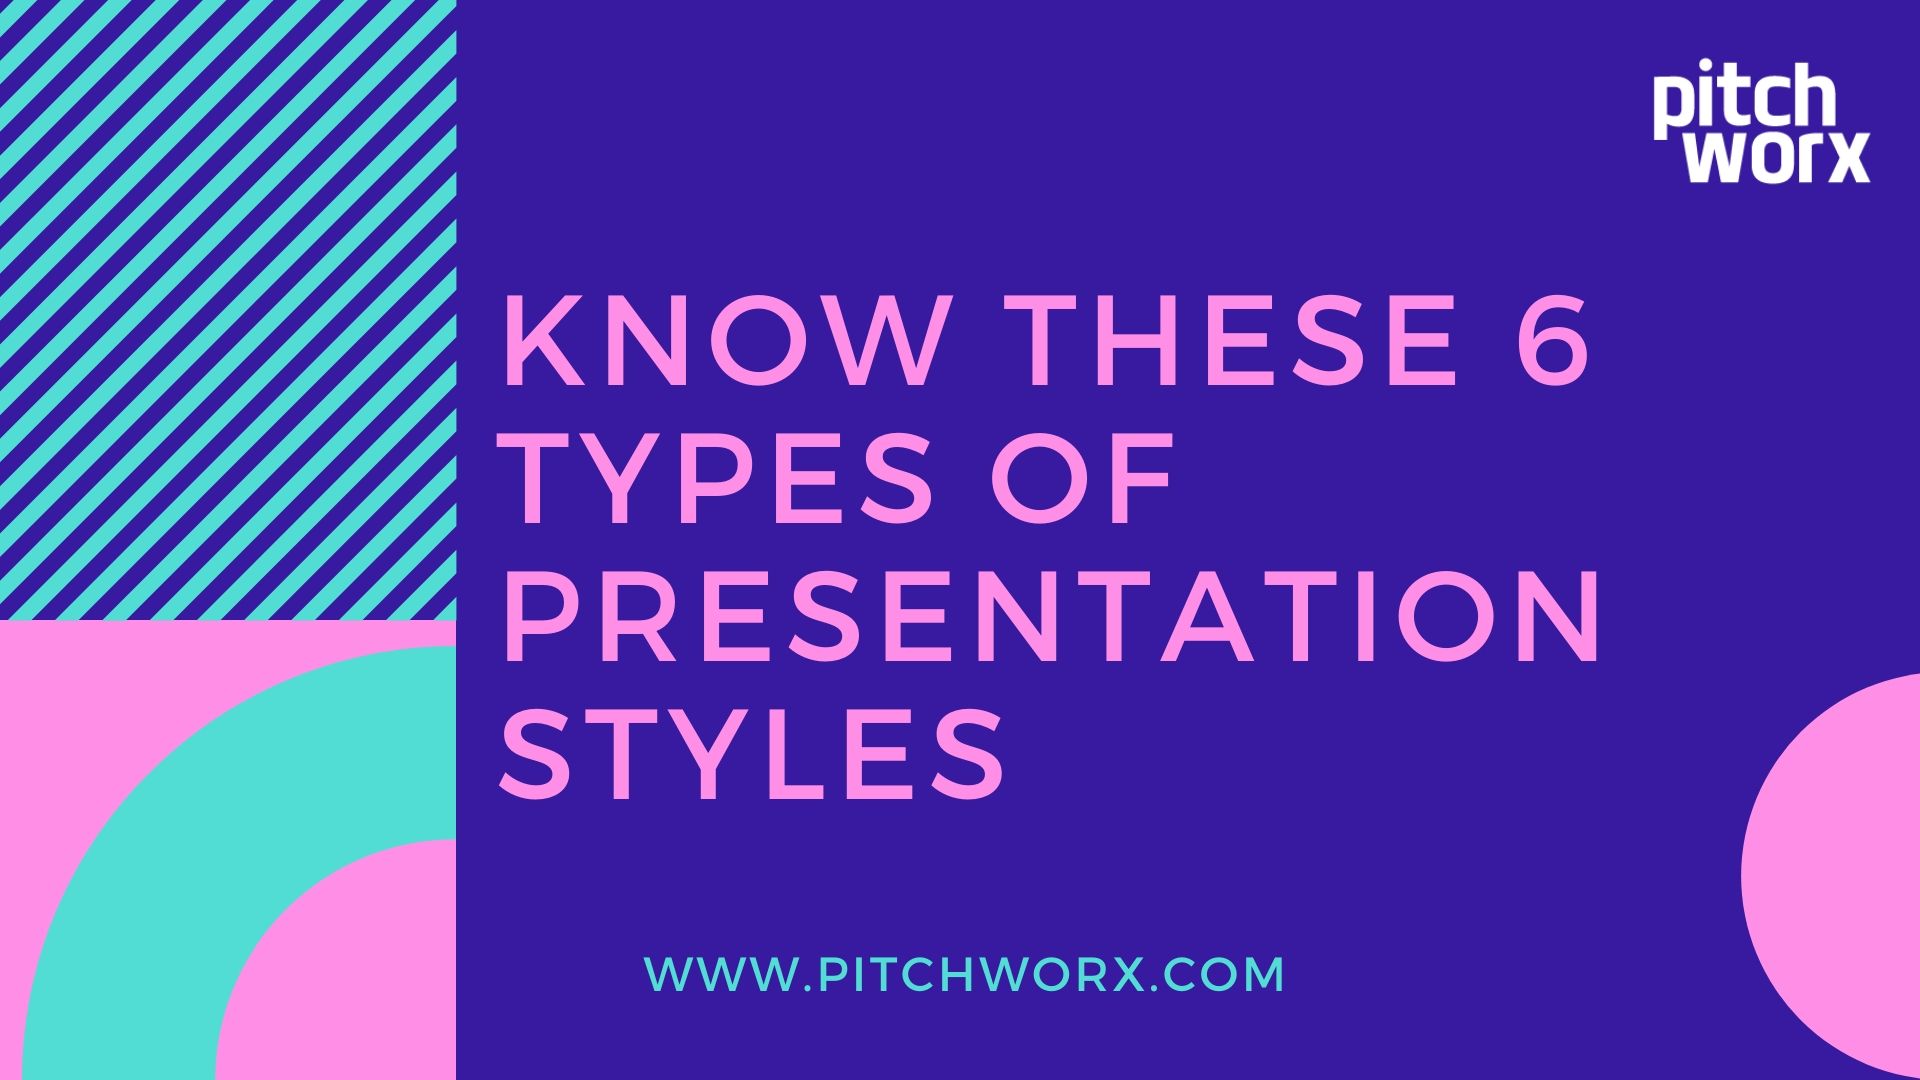 Know these 6 types of presentation styles